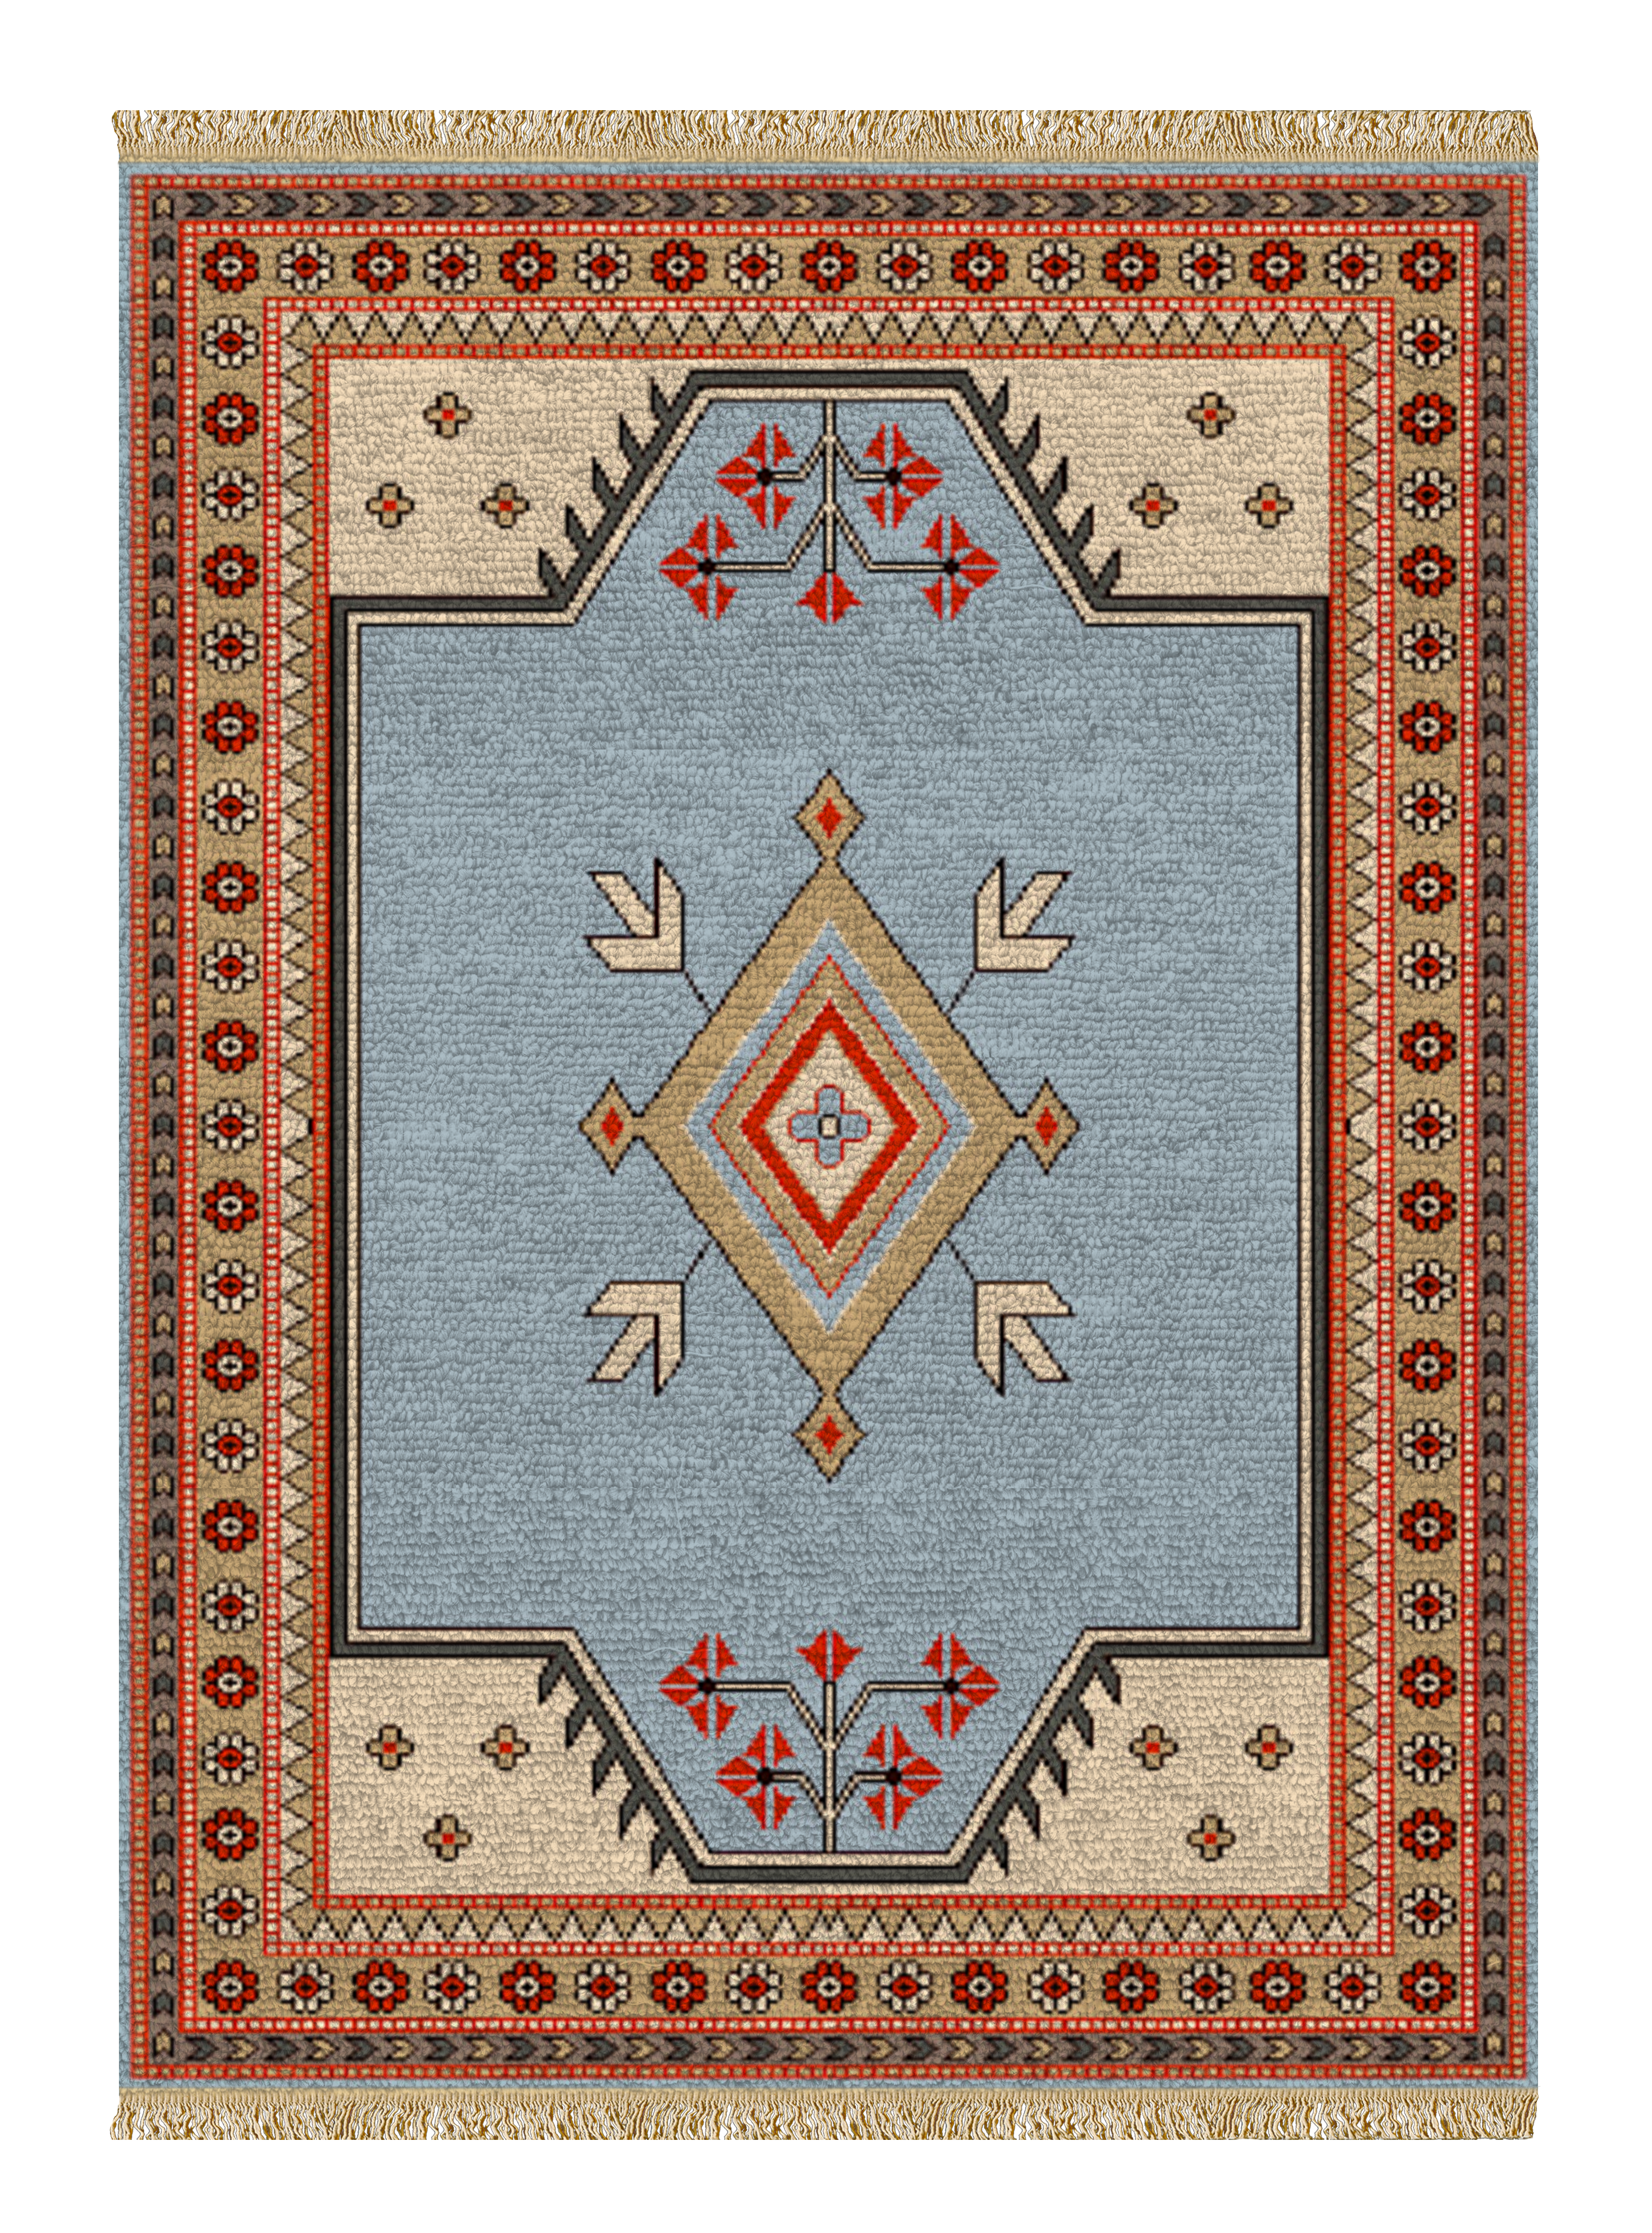 Selendi Hand-Knotted Wool Area Rug by Kevin Francis Design | Atlanta Interior Designer | Luxury Home Decor